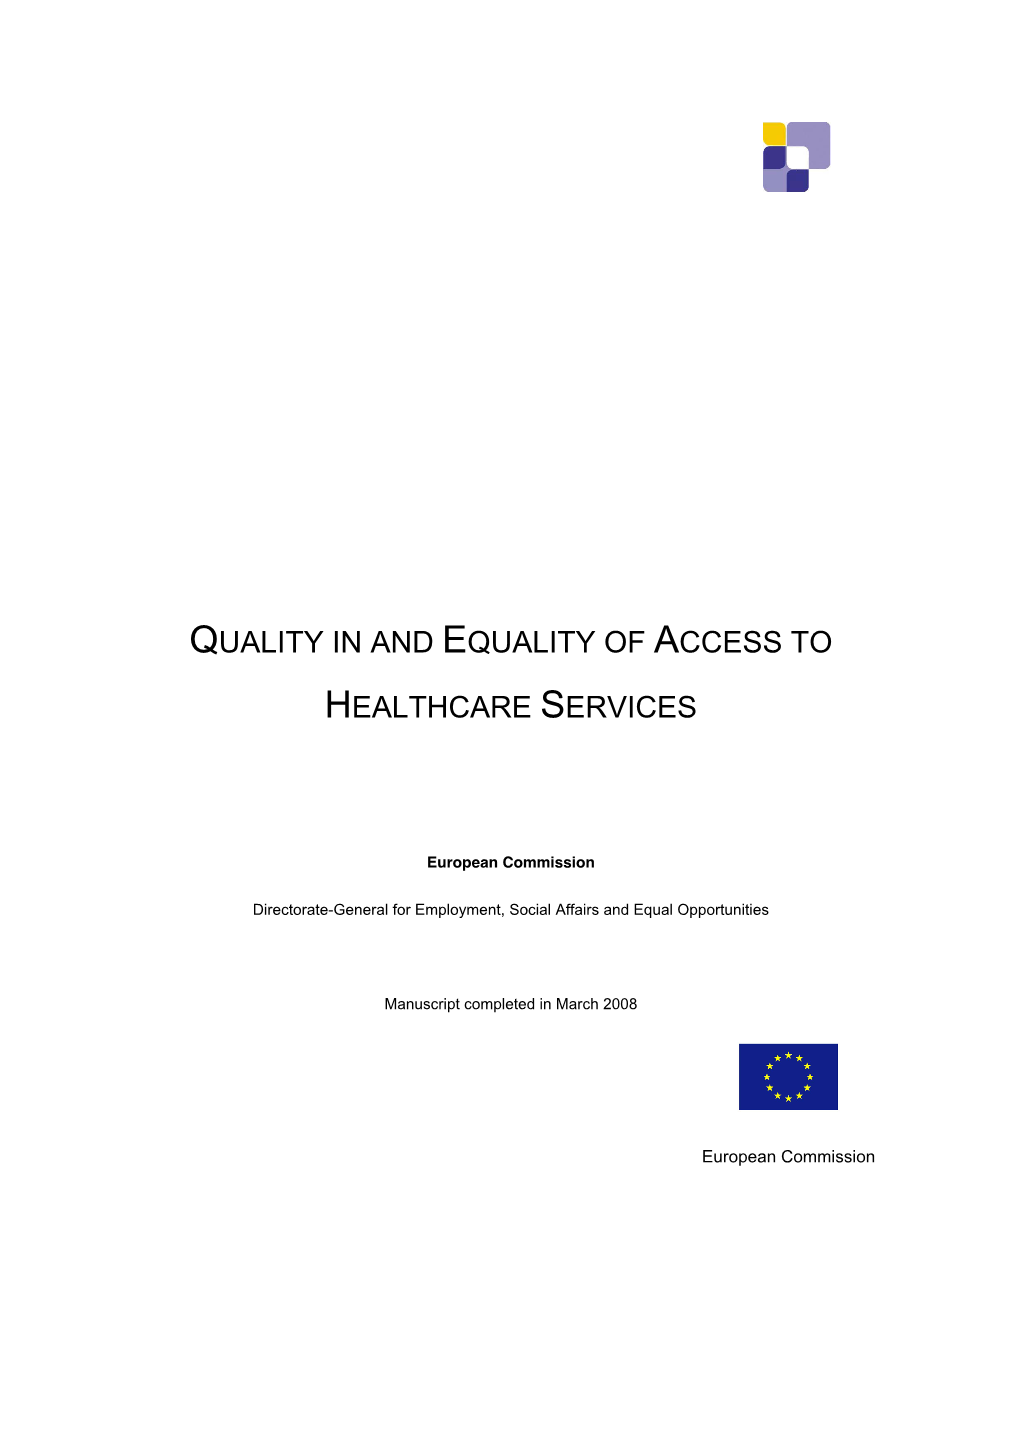 Quality in and Equality of Access to Healthcare Services